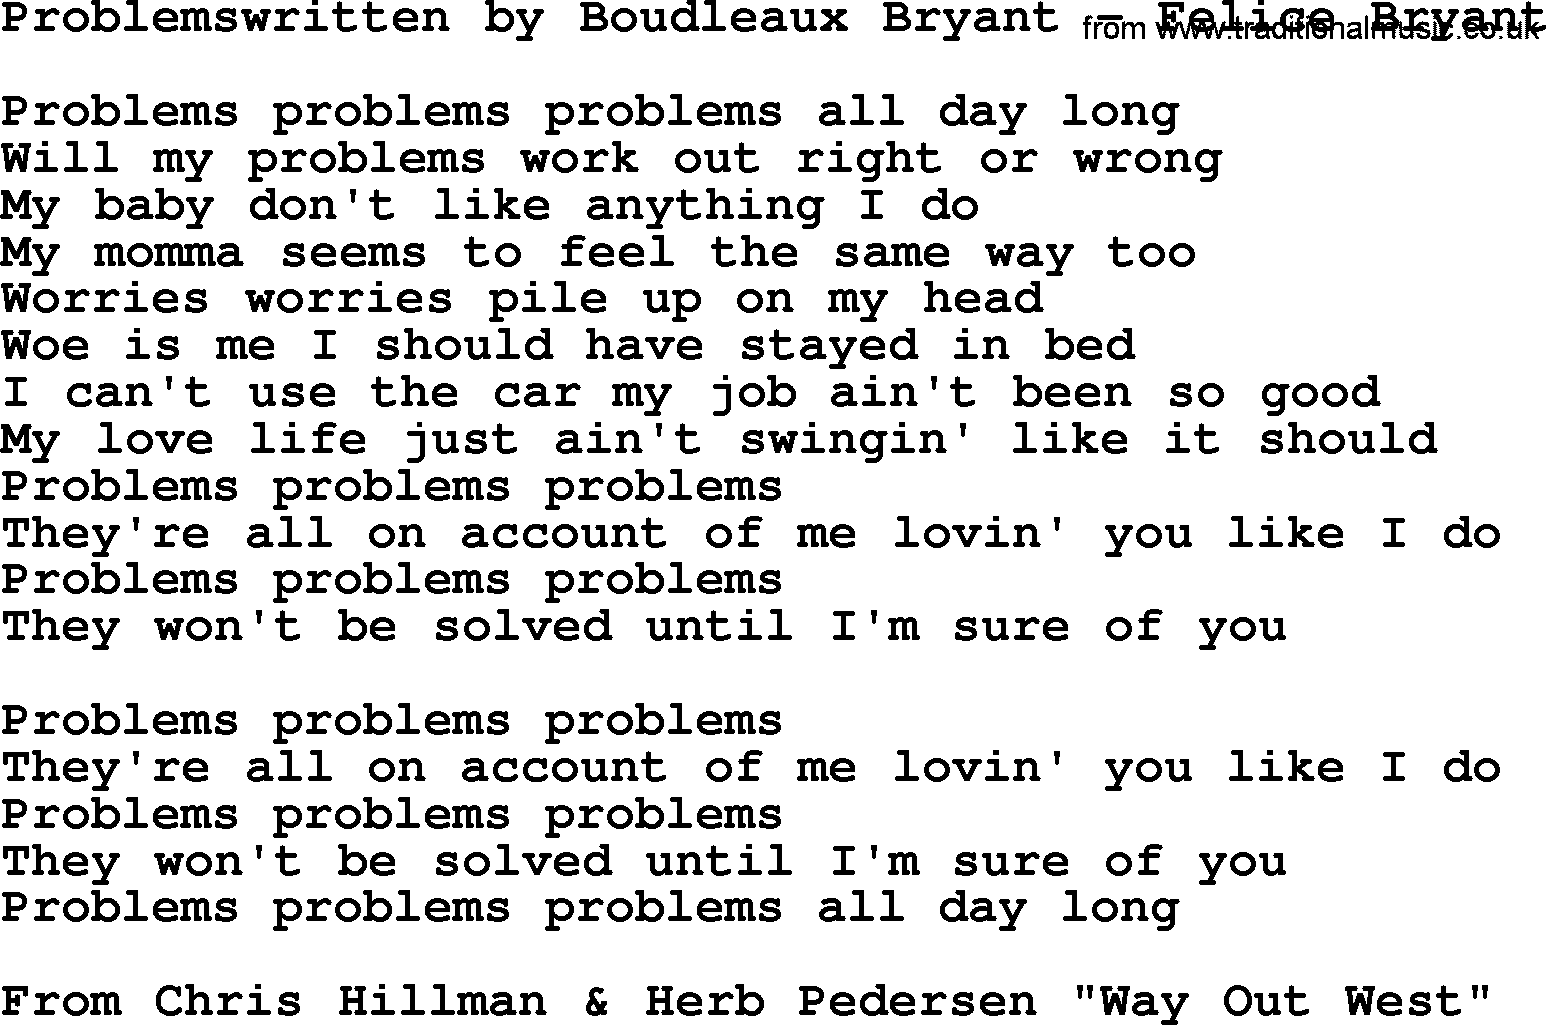 The Byrds song Problemswritten By Boudleaux Bryant  Felice Bryant, lyrics